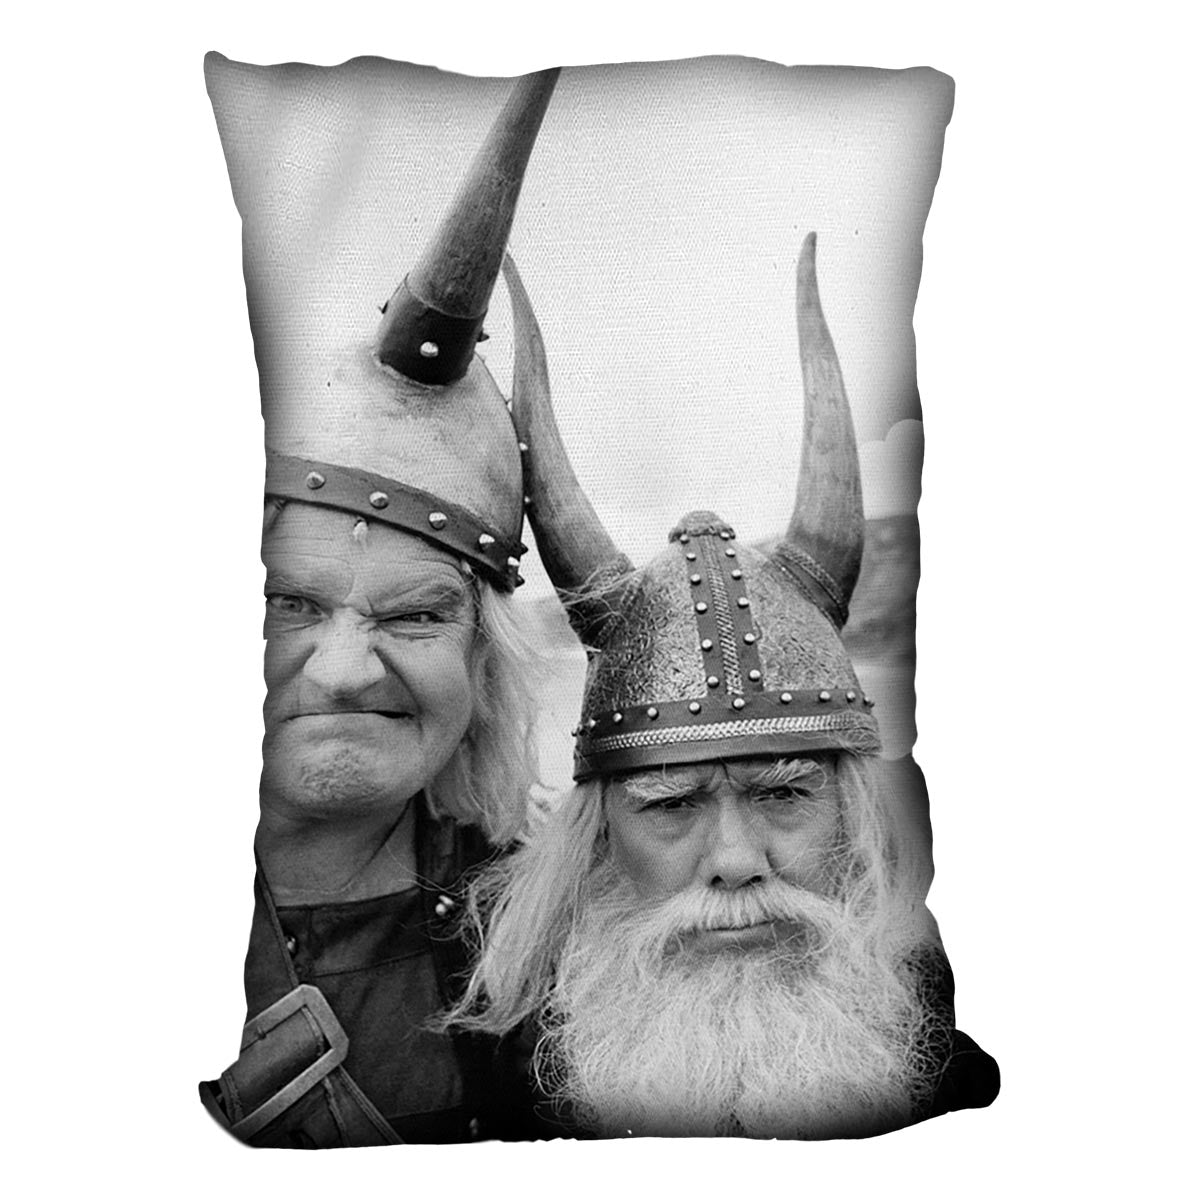 The Two Ronnies dressed as Vikings Cushion